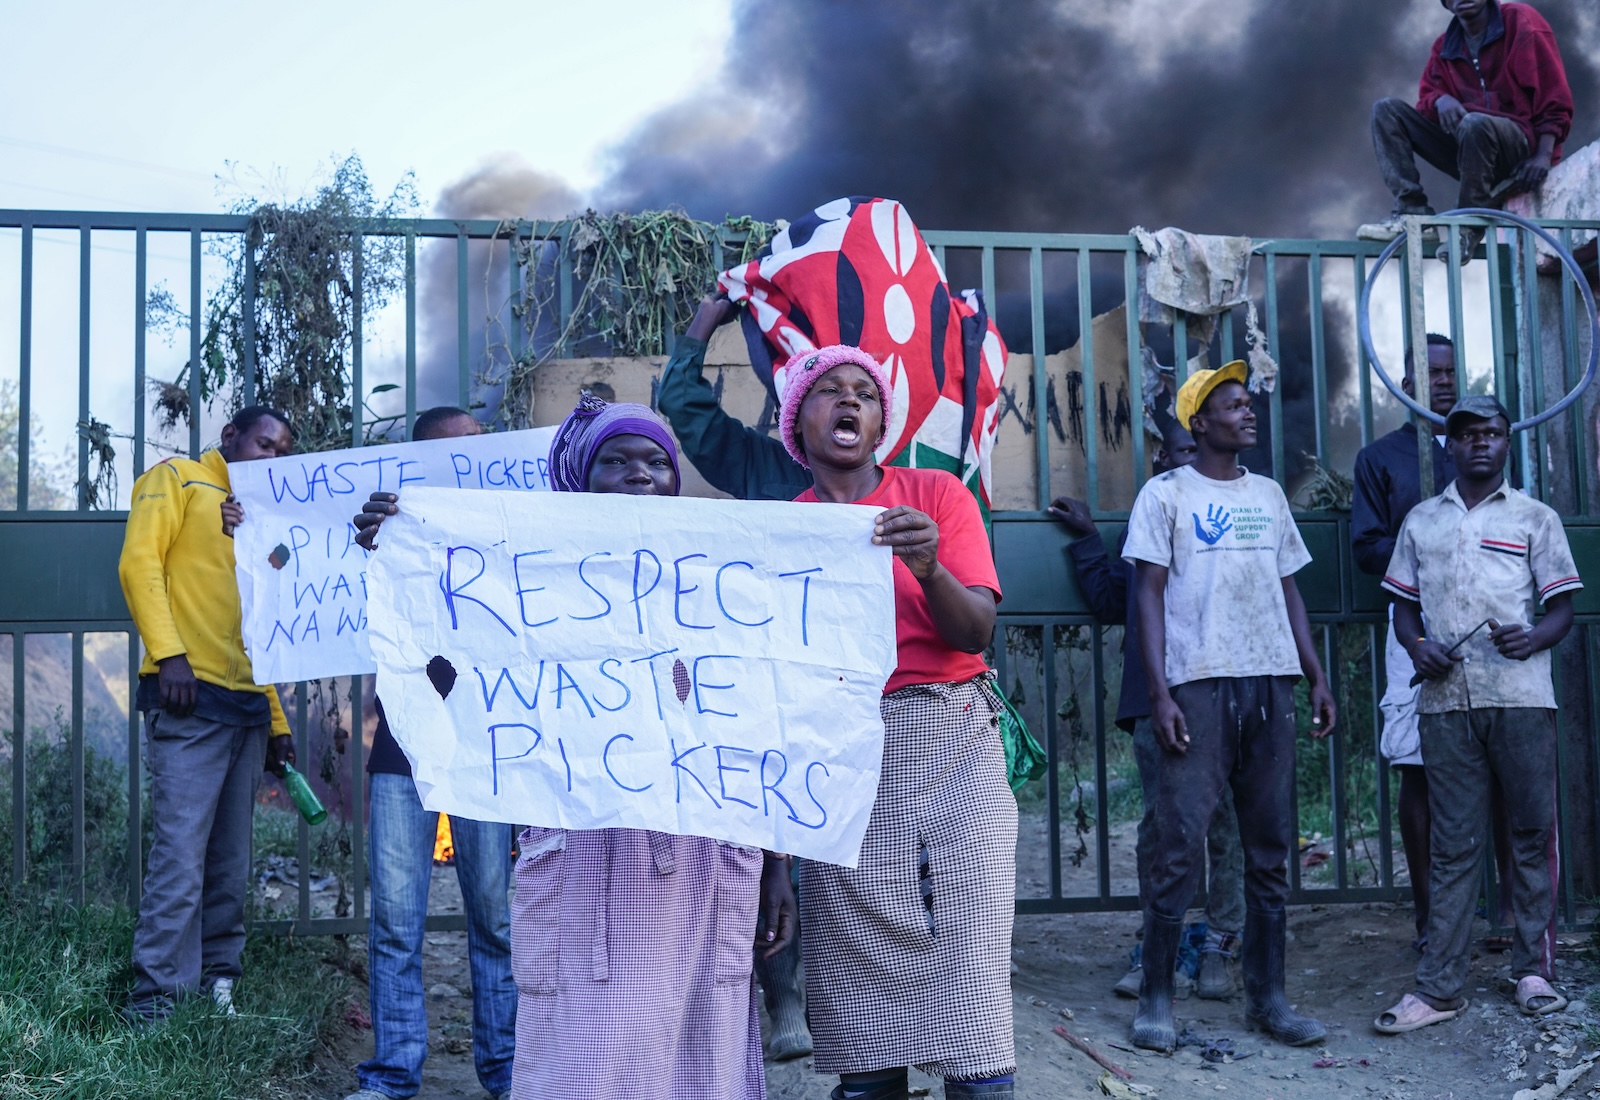 Two waste pickers in the foreground hold a sign reading, "Respect waste pickers." They stand in front of a fence, and smoke billows in the background.